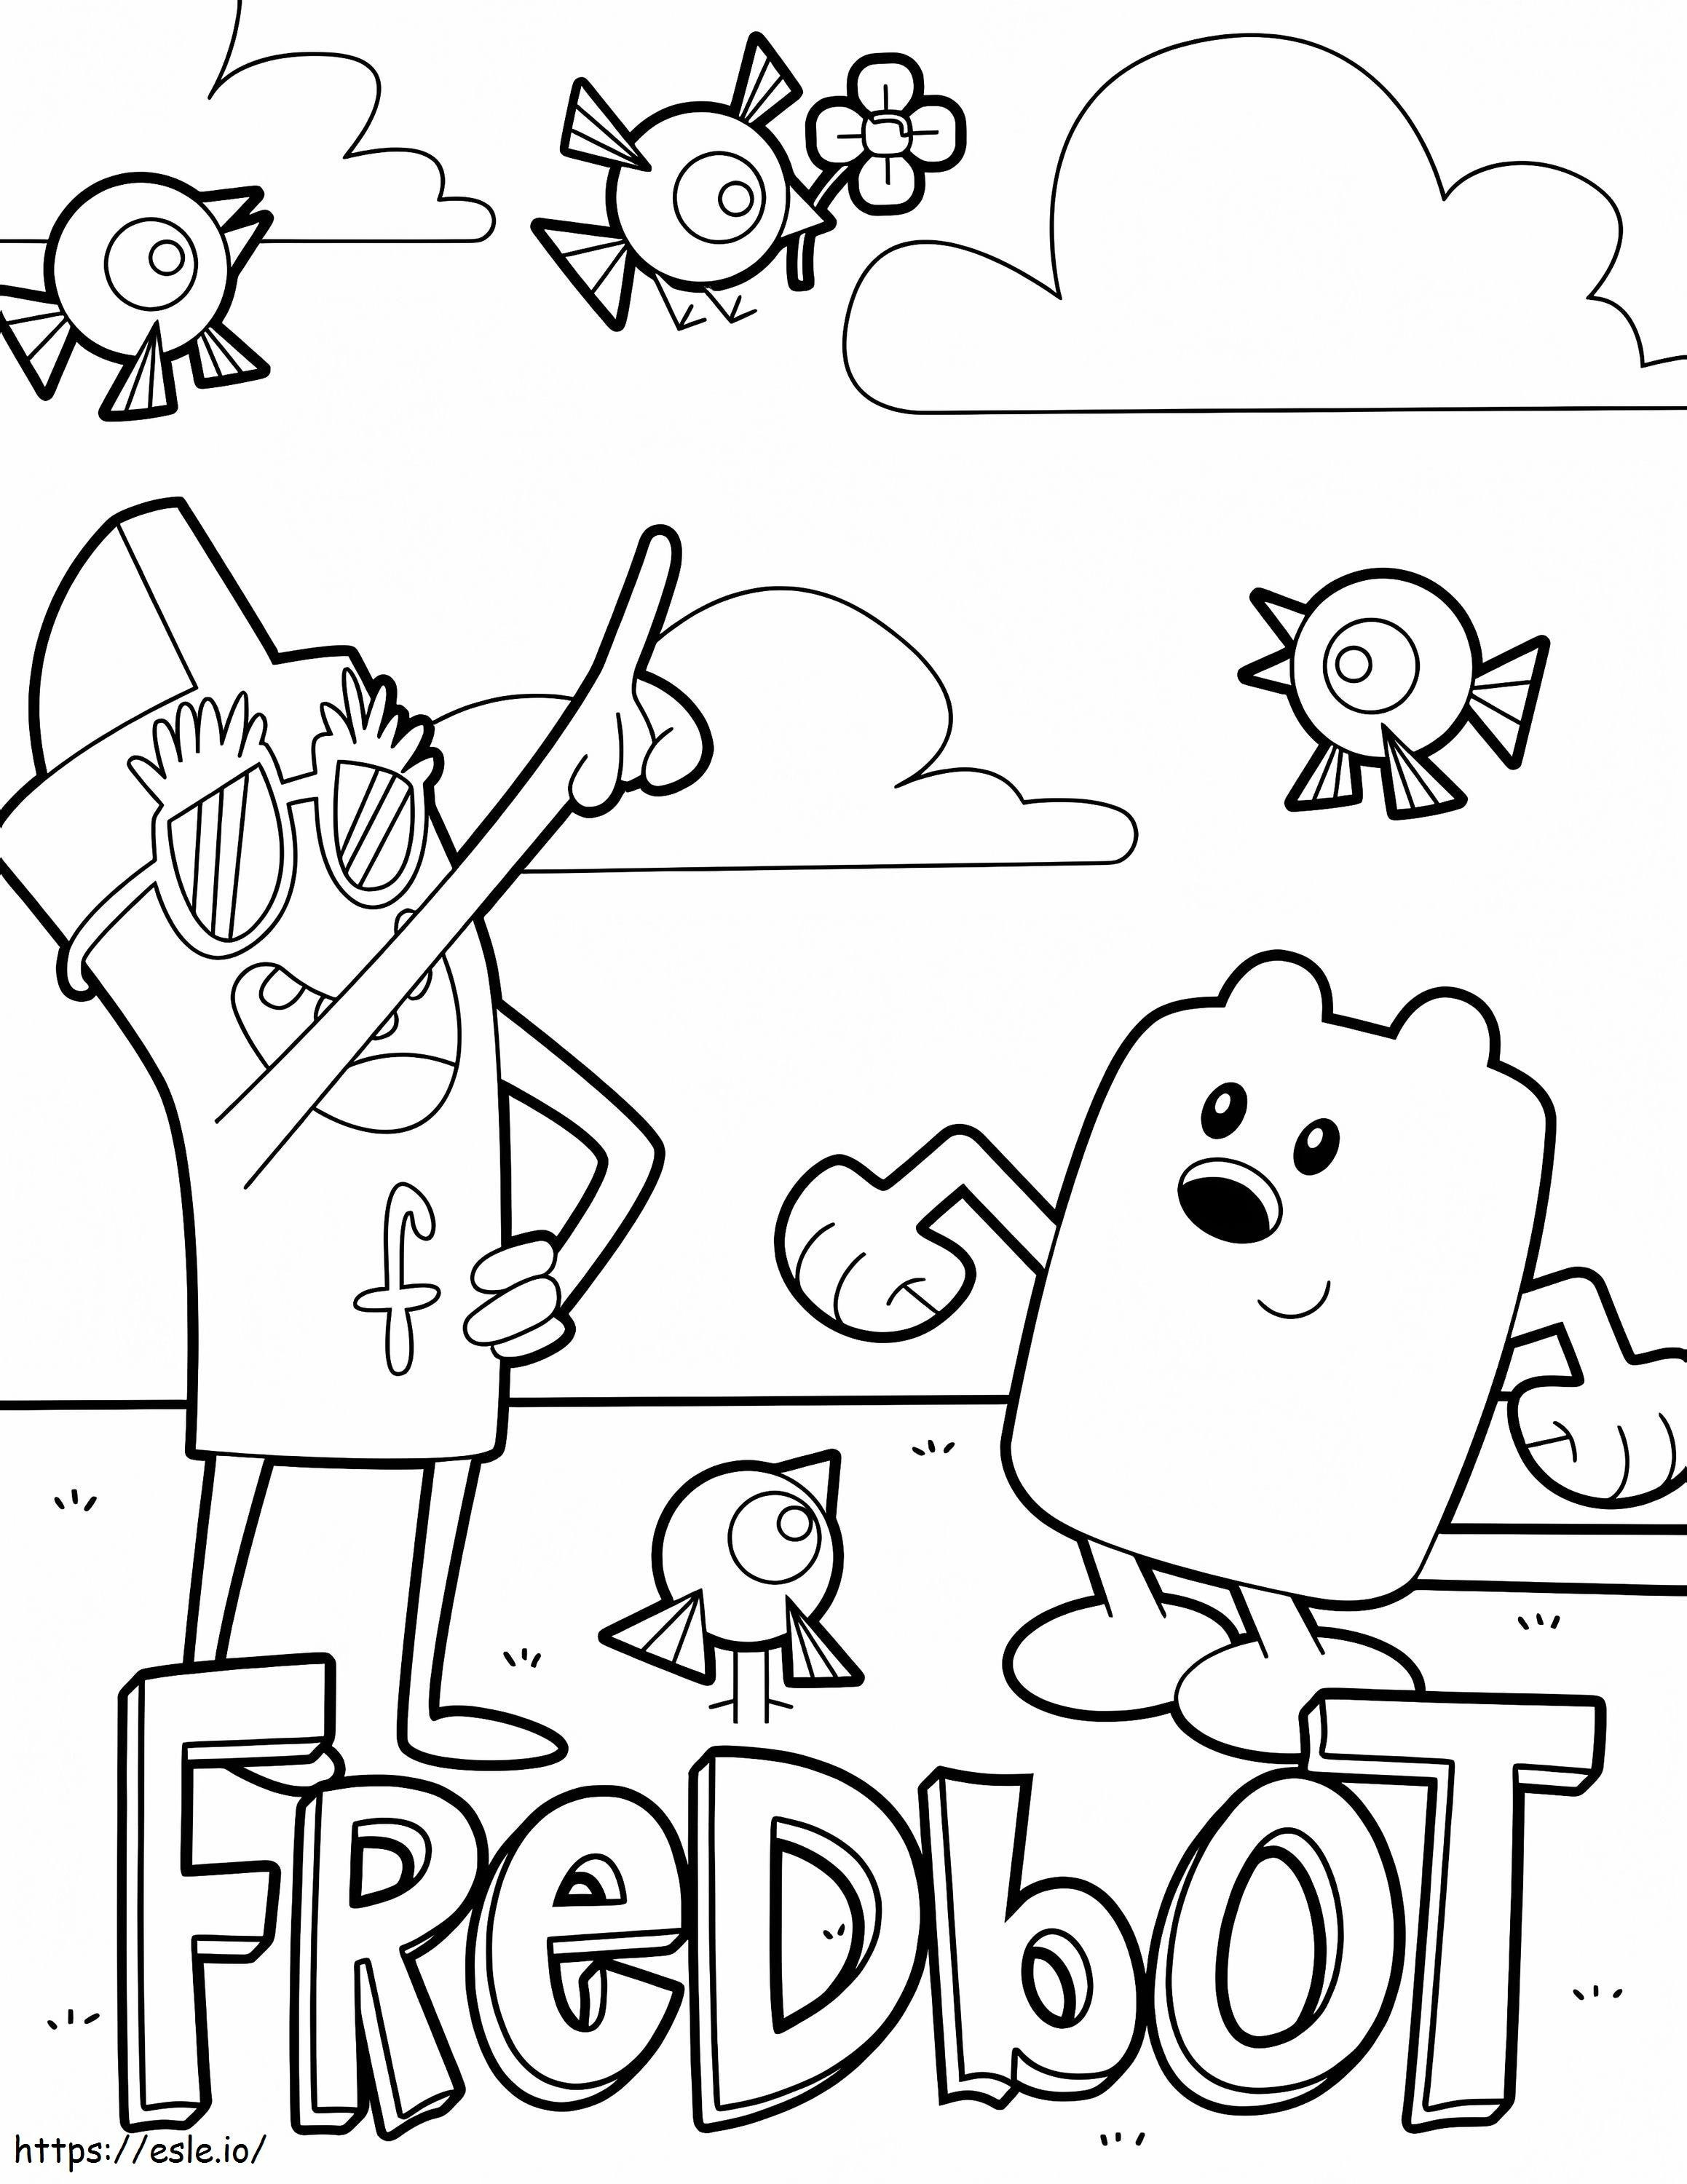 Free Printable Wow Wow Wubbzy coloring page